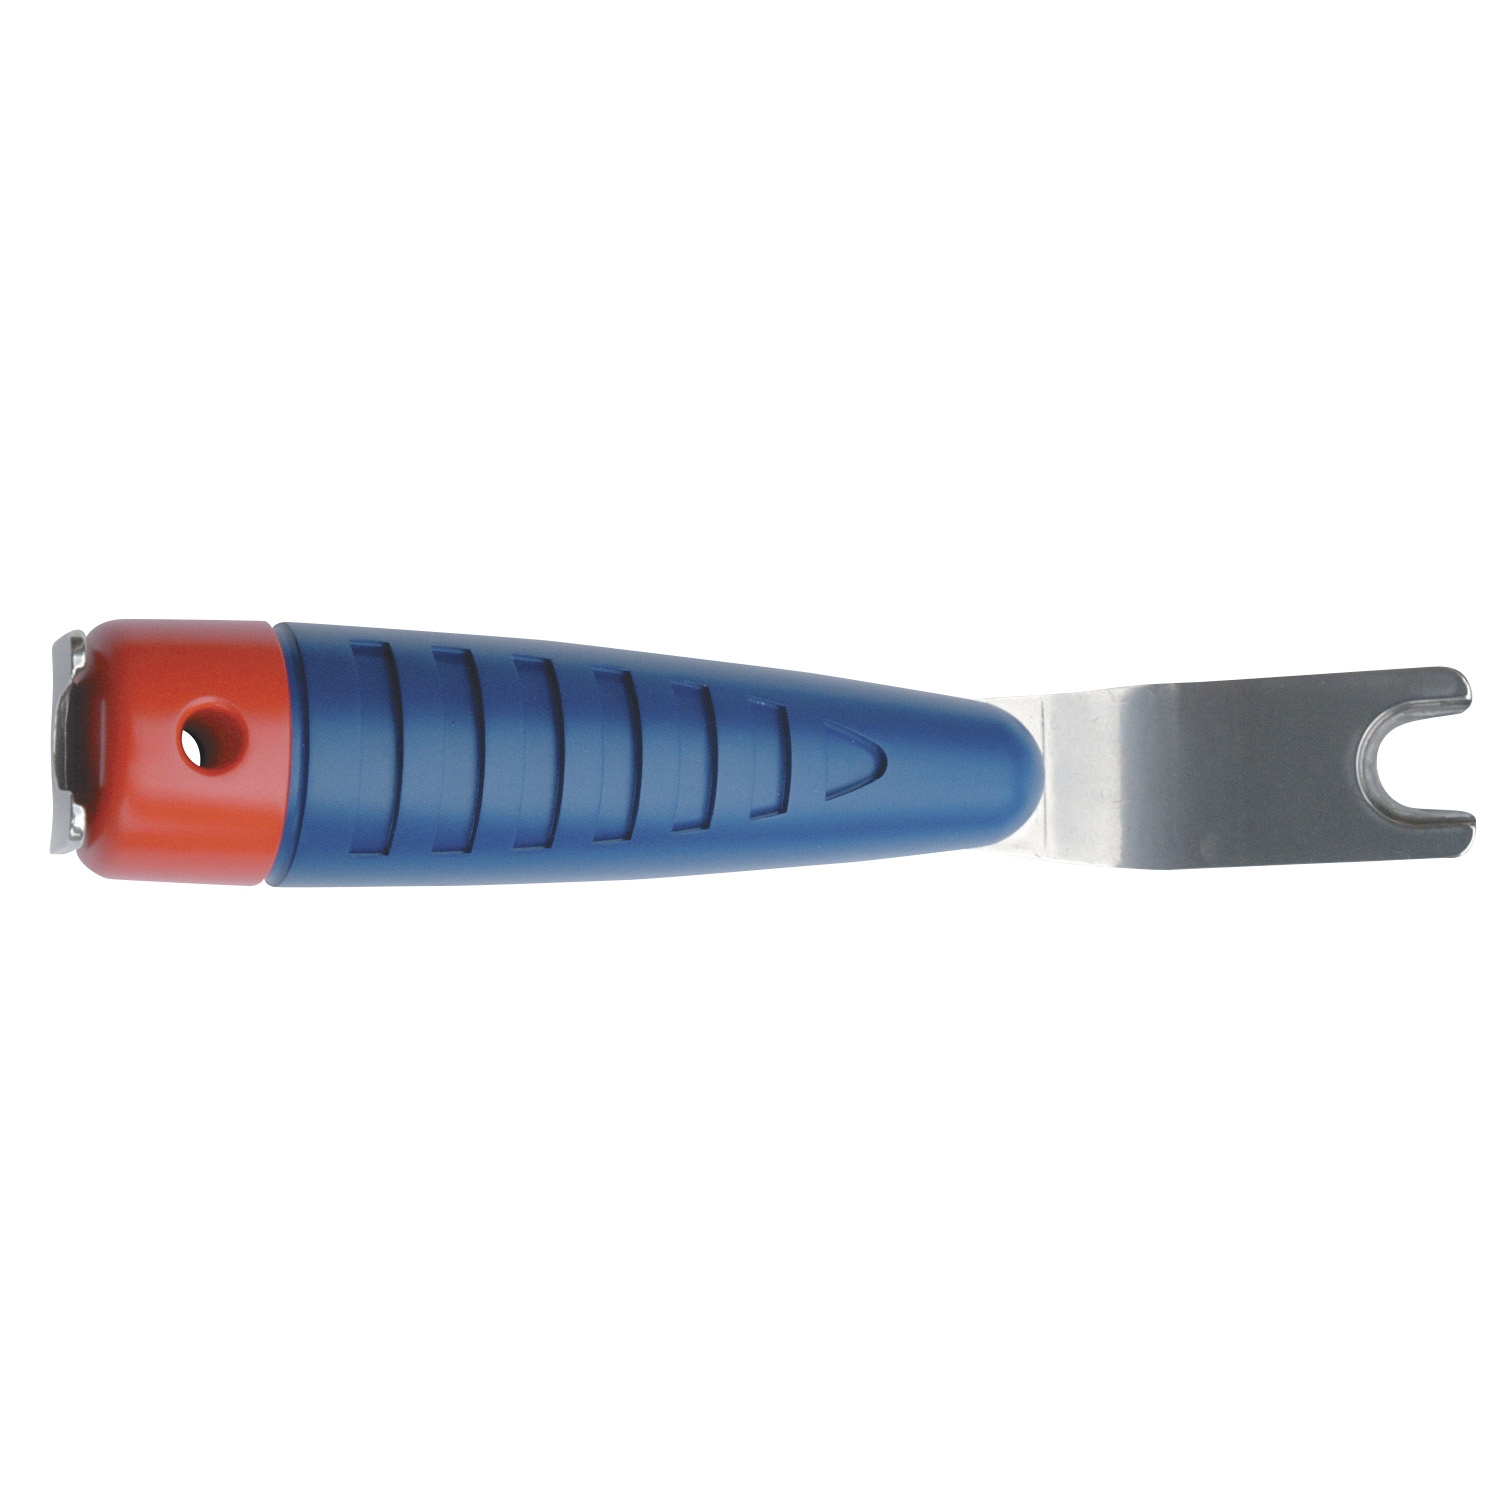 IRONWOOD PACIFIC DeckMate Multi-Function Tool 